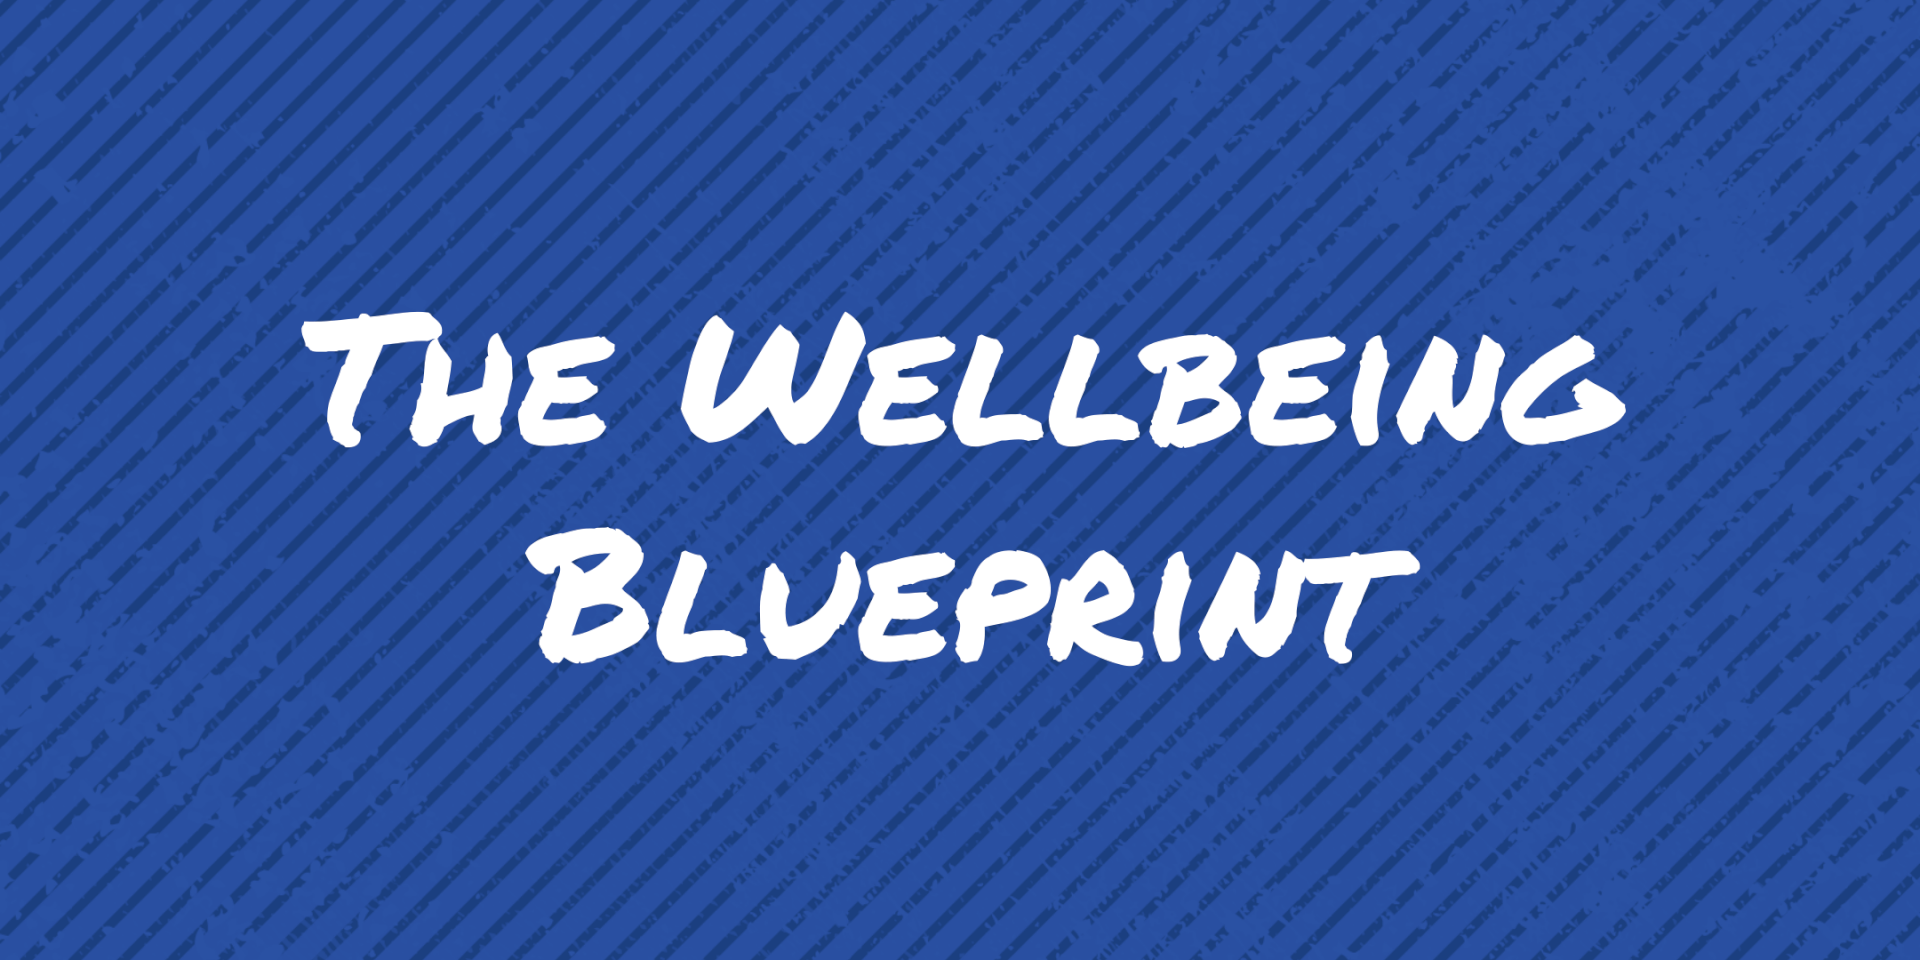 https://wellbeingblueprint.org/wp-content/uploads/2022/04/WBBP_PDF.png